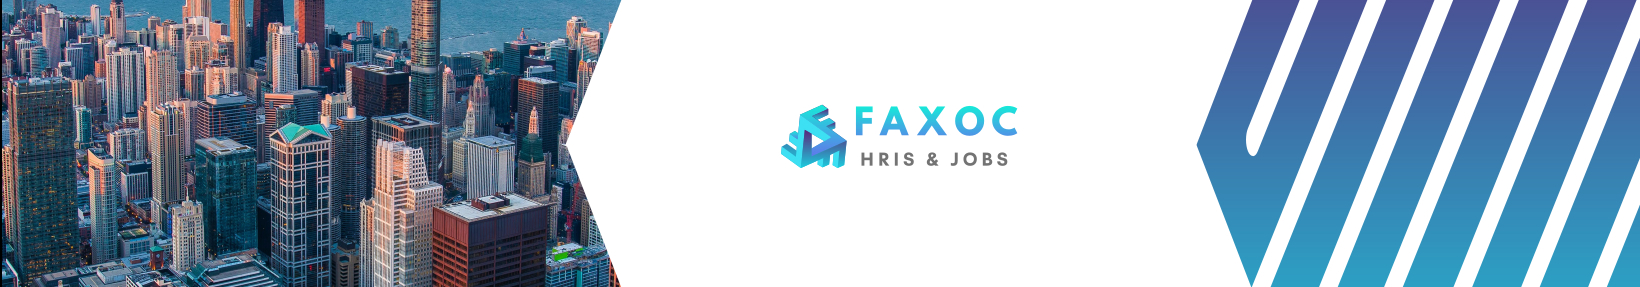 Faxoc Jobs&HRMS's profile banner